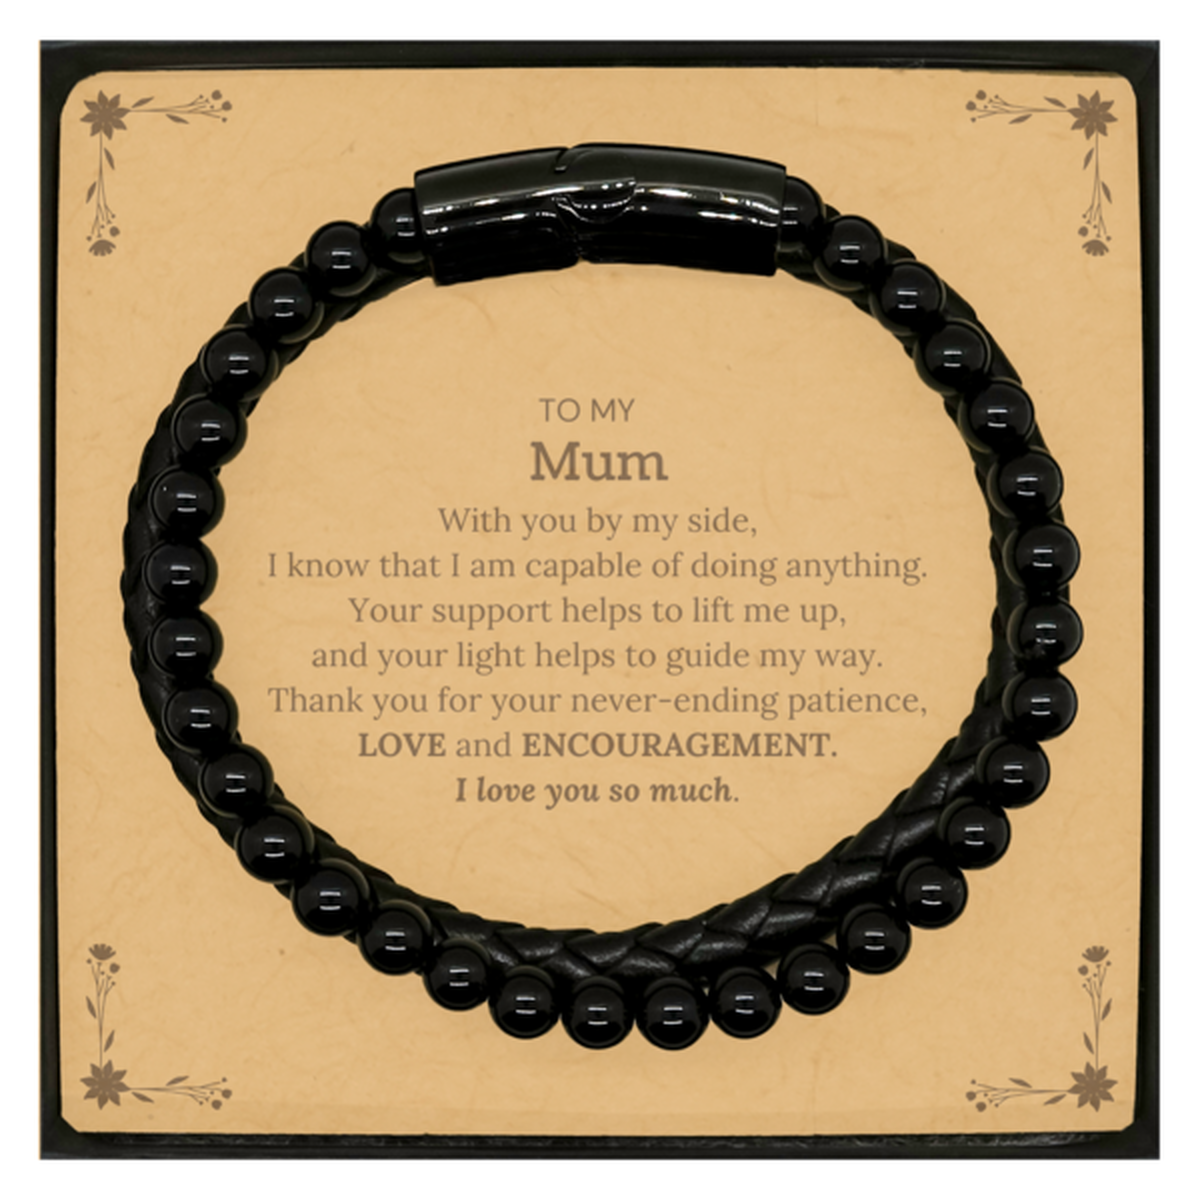 Appreciation Mum Stone Leather Bracelets Gifts, To My Mum Birthday Christmas Wedding Keepsake Gifts for Mum With you by my side, I know that I am capable of doing anything. I love you so much